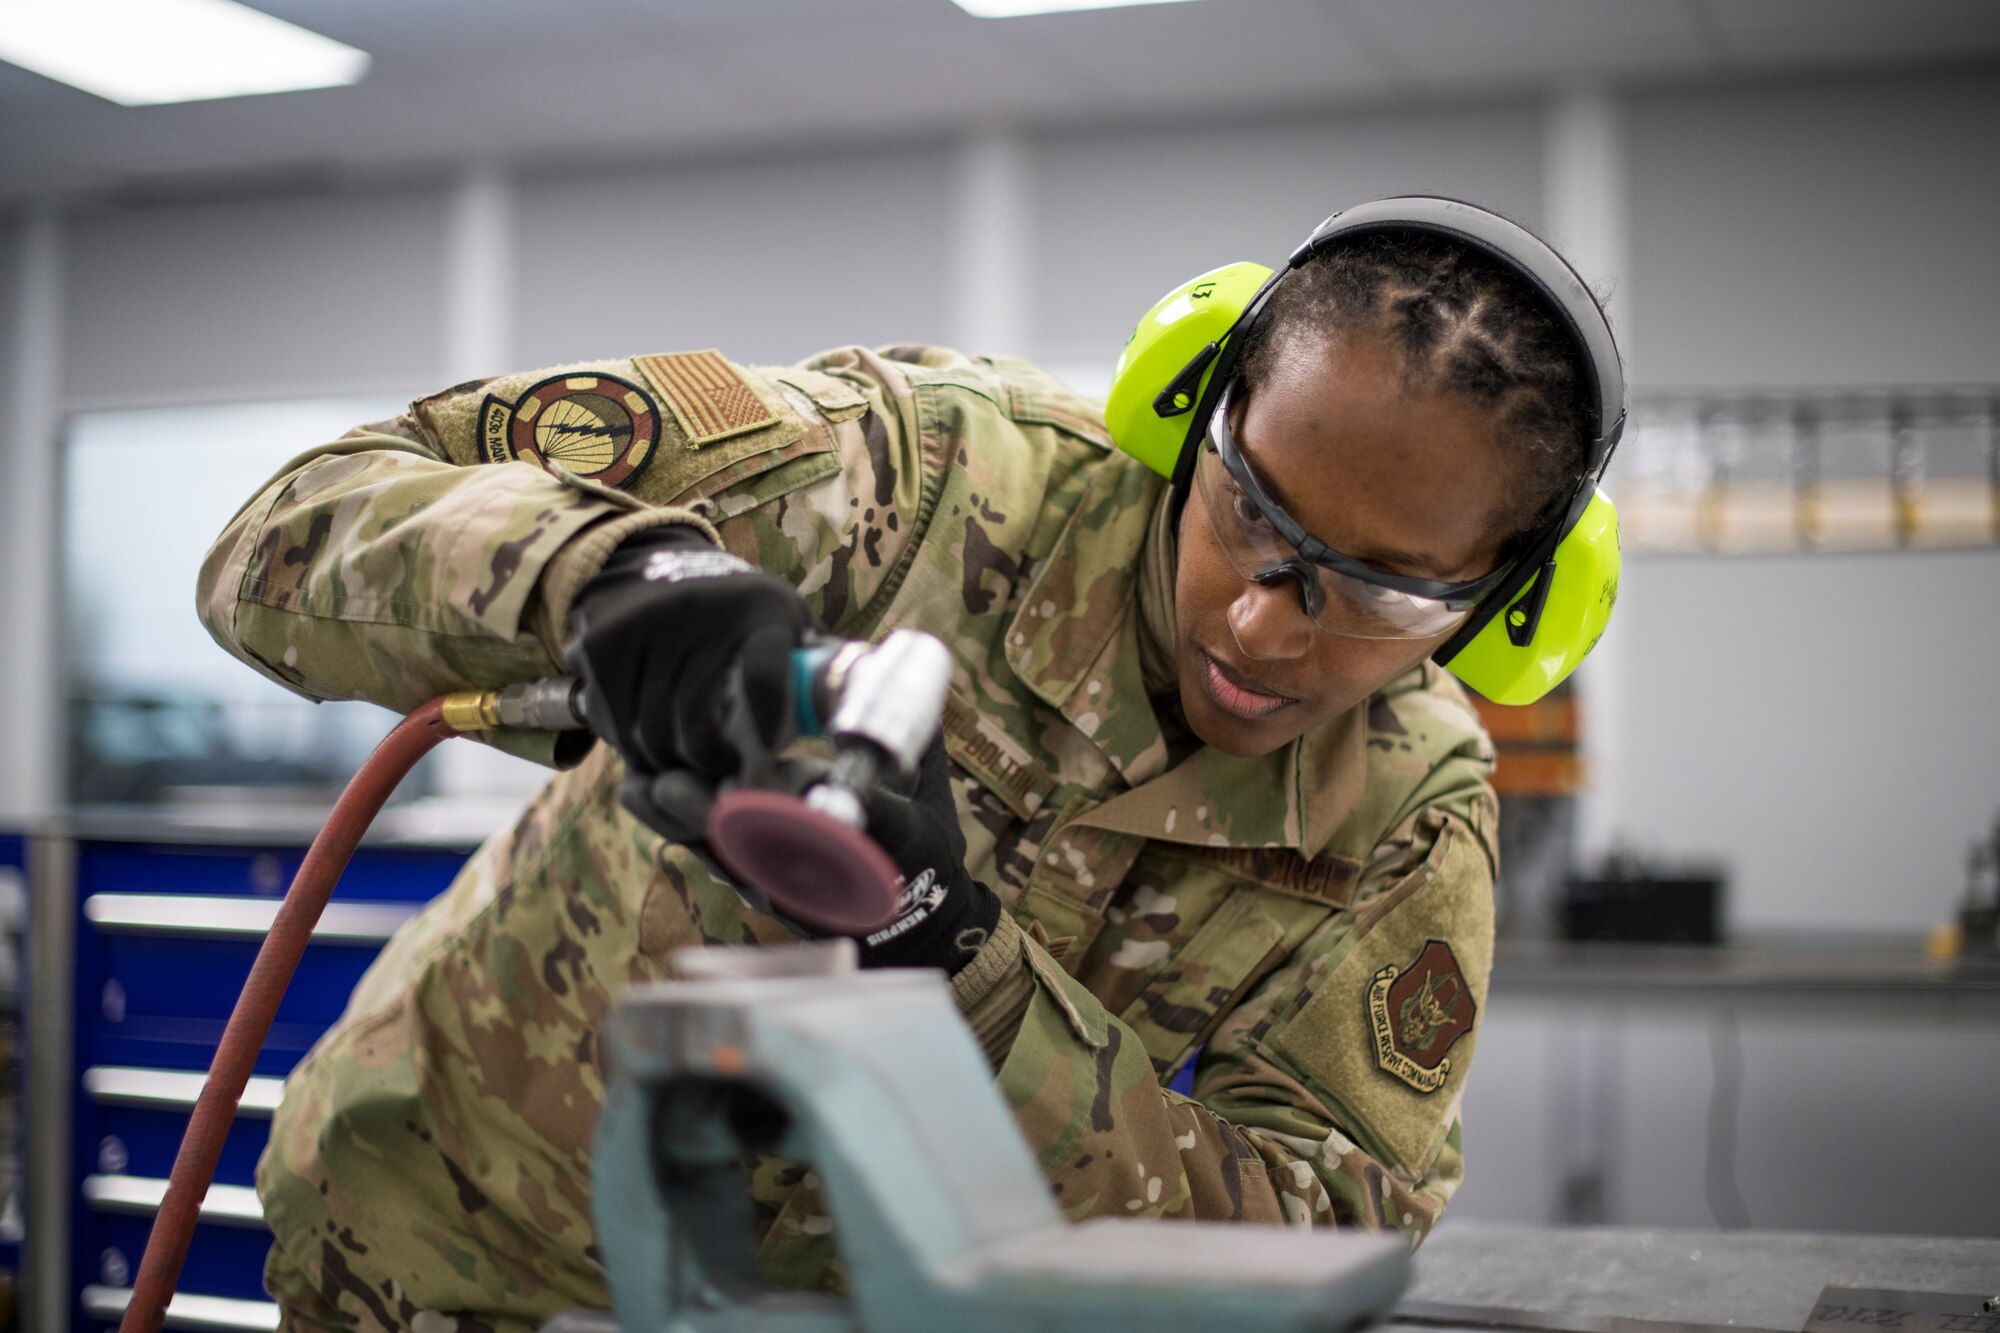 Senior Airman Ebony McKenzie-Bolton, 403rd Fabrication Flight metals technology apprentice, grinds a piece of aluminum Nov. 30, 2020 at Keesler Air Force Base, Mississippi. The  Fabrication Flight is responsible for aircraft structural maintenance to include painting and sanding of aircraft parts. The 403rd Wing’s fleet consists of 10 WC-130J and 10 C-130J Super Hercules aircraft which are flown by the 53rd Weather Reconnaissance Squadron and 815th Airlift Squadron, respectively. (U.S. Air Force photo by 2nd Lt. Christopher Carranza)